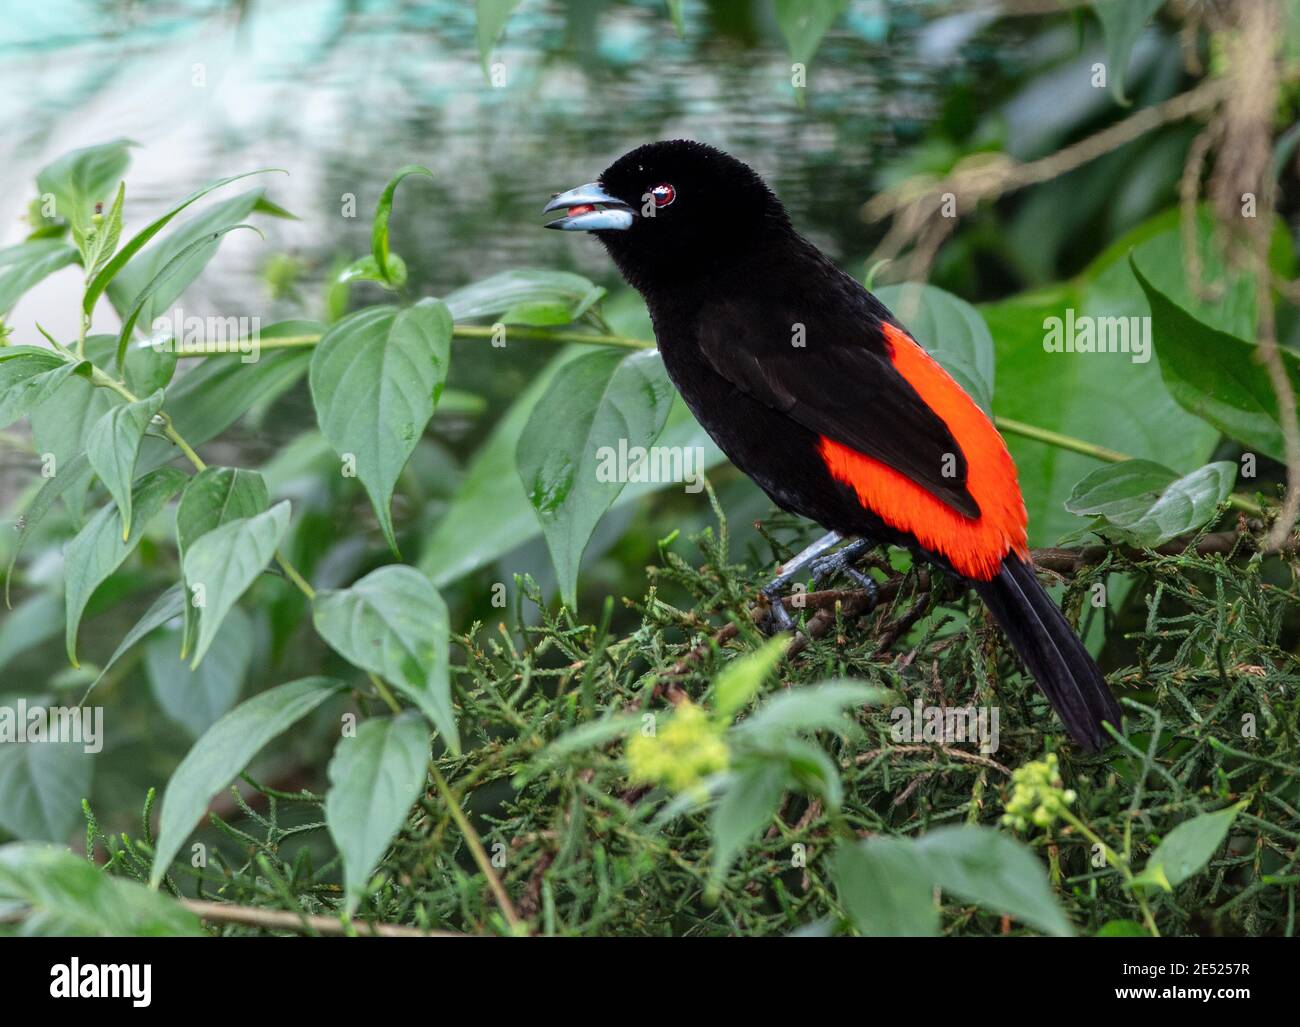 A male Scarlet-rumped Tanager (Ramphocelus passerinii) in Costa Rica Stock Photo